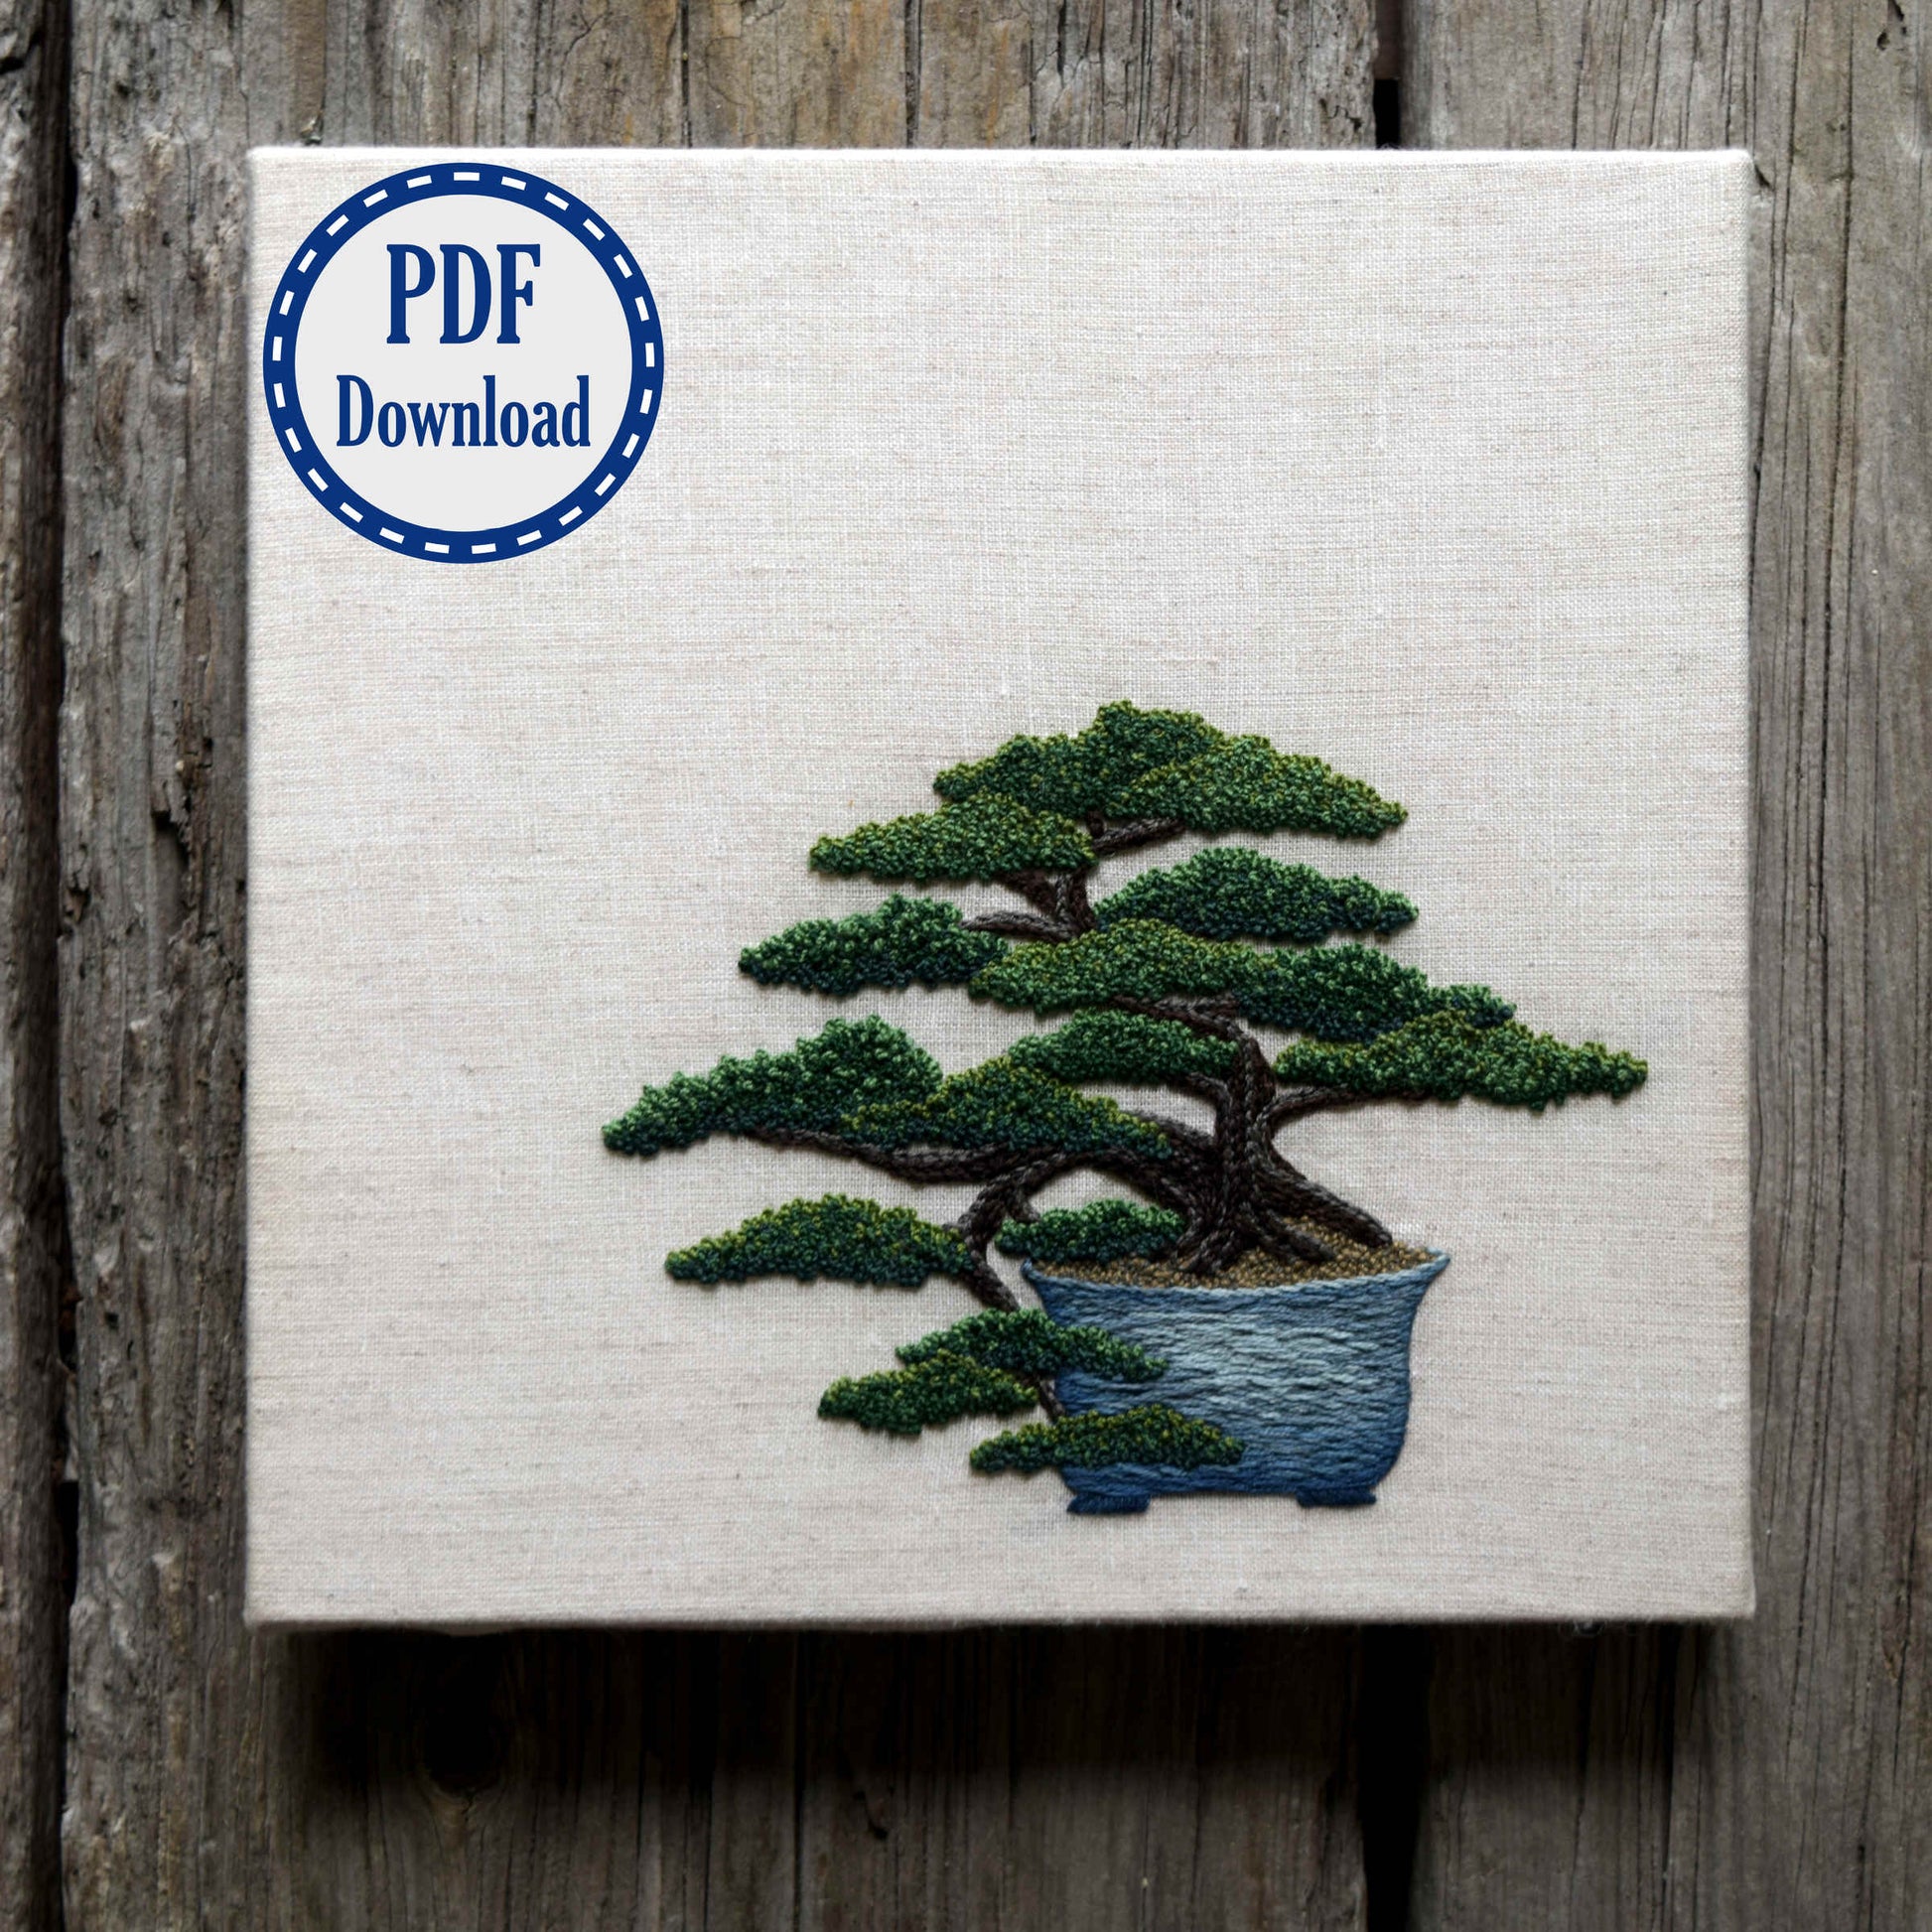 Hand embroidered juniper bonsai in blue pot on natural linen colored fabric. Badge in the corner says PDF download